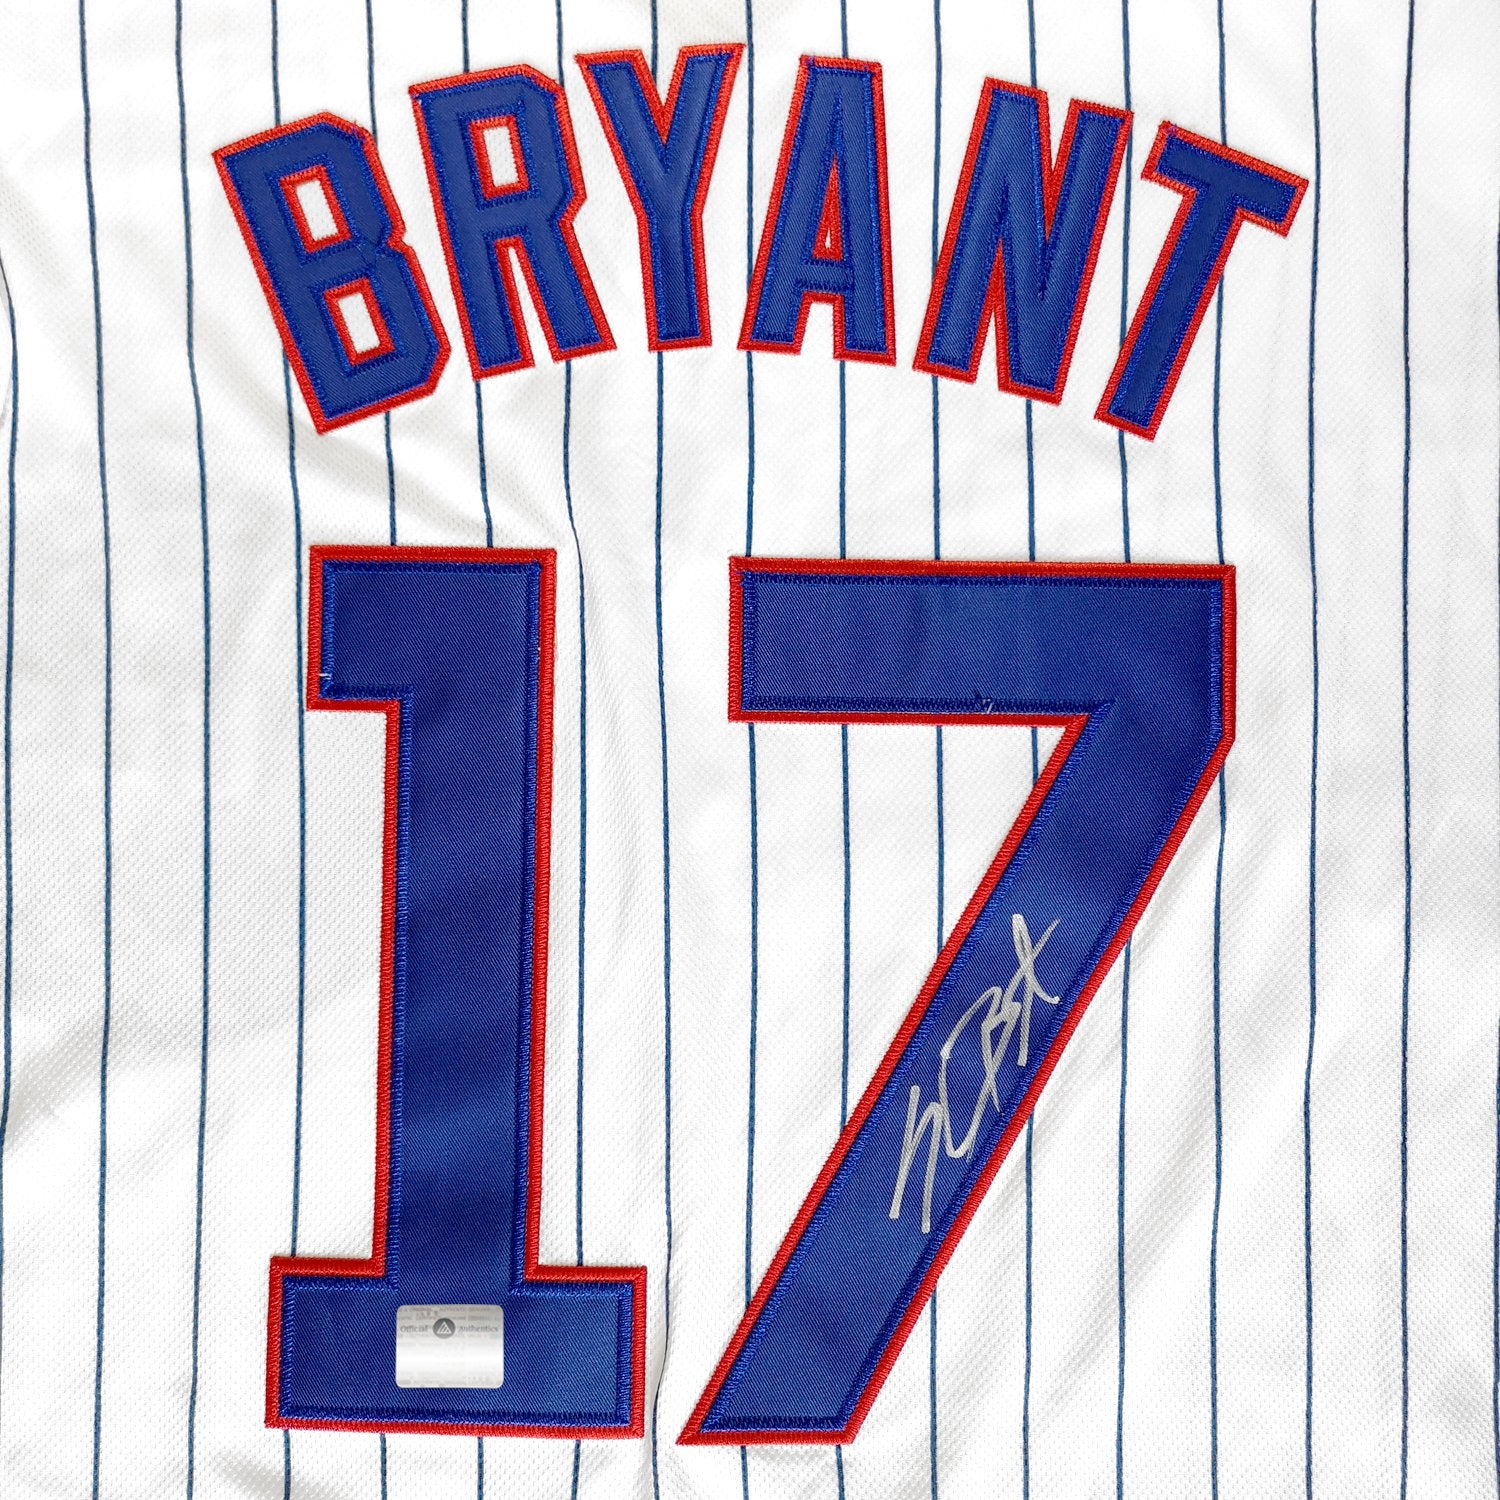 Kris Bryant 'Chicago Cubs' Hand-Signed 